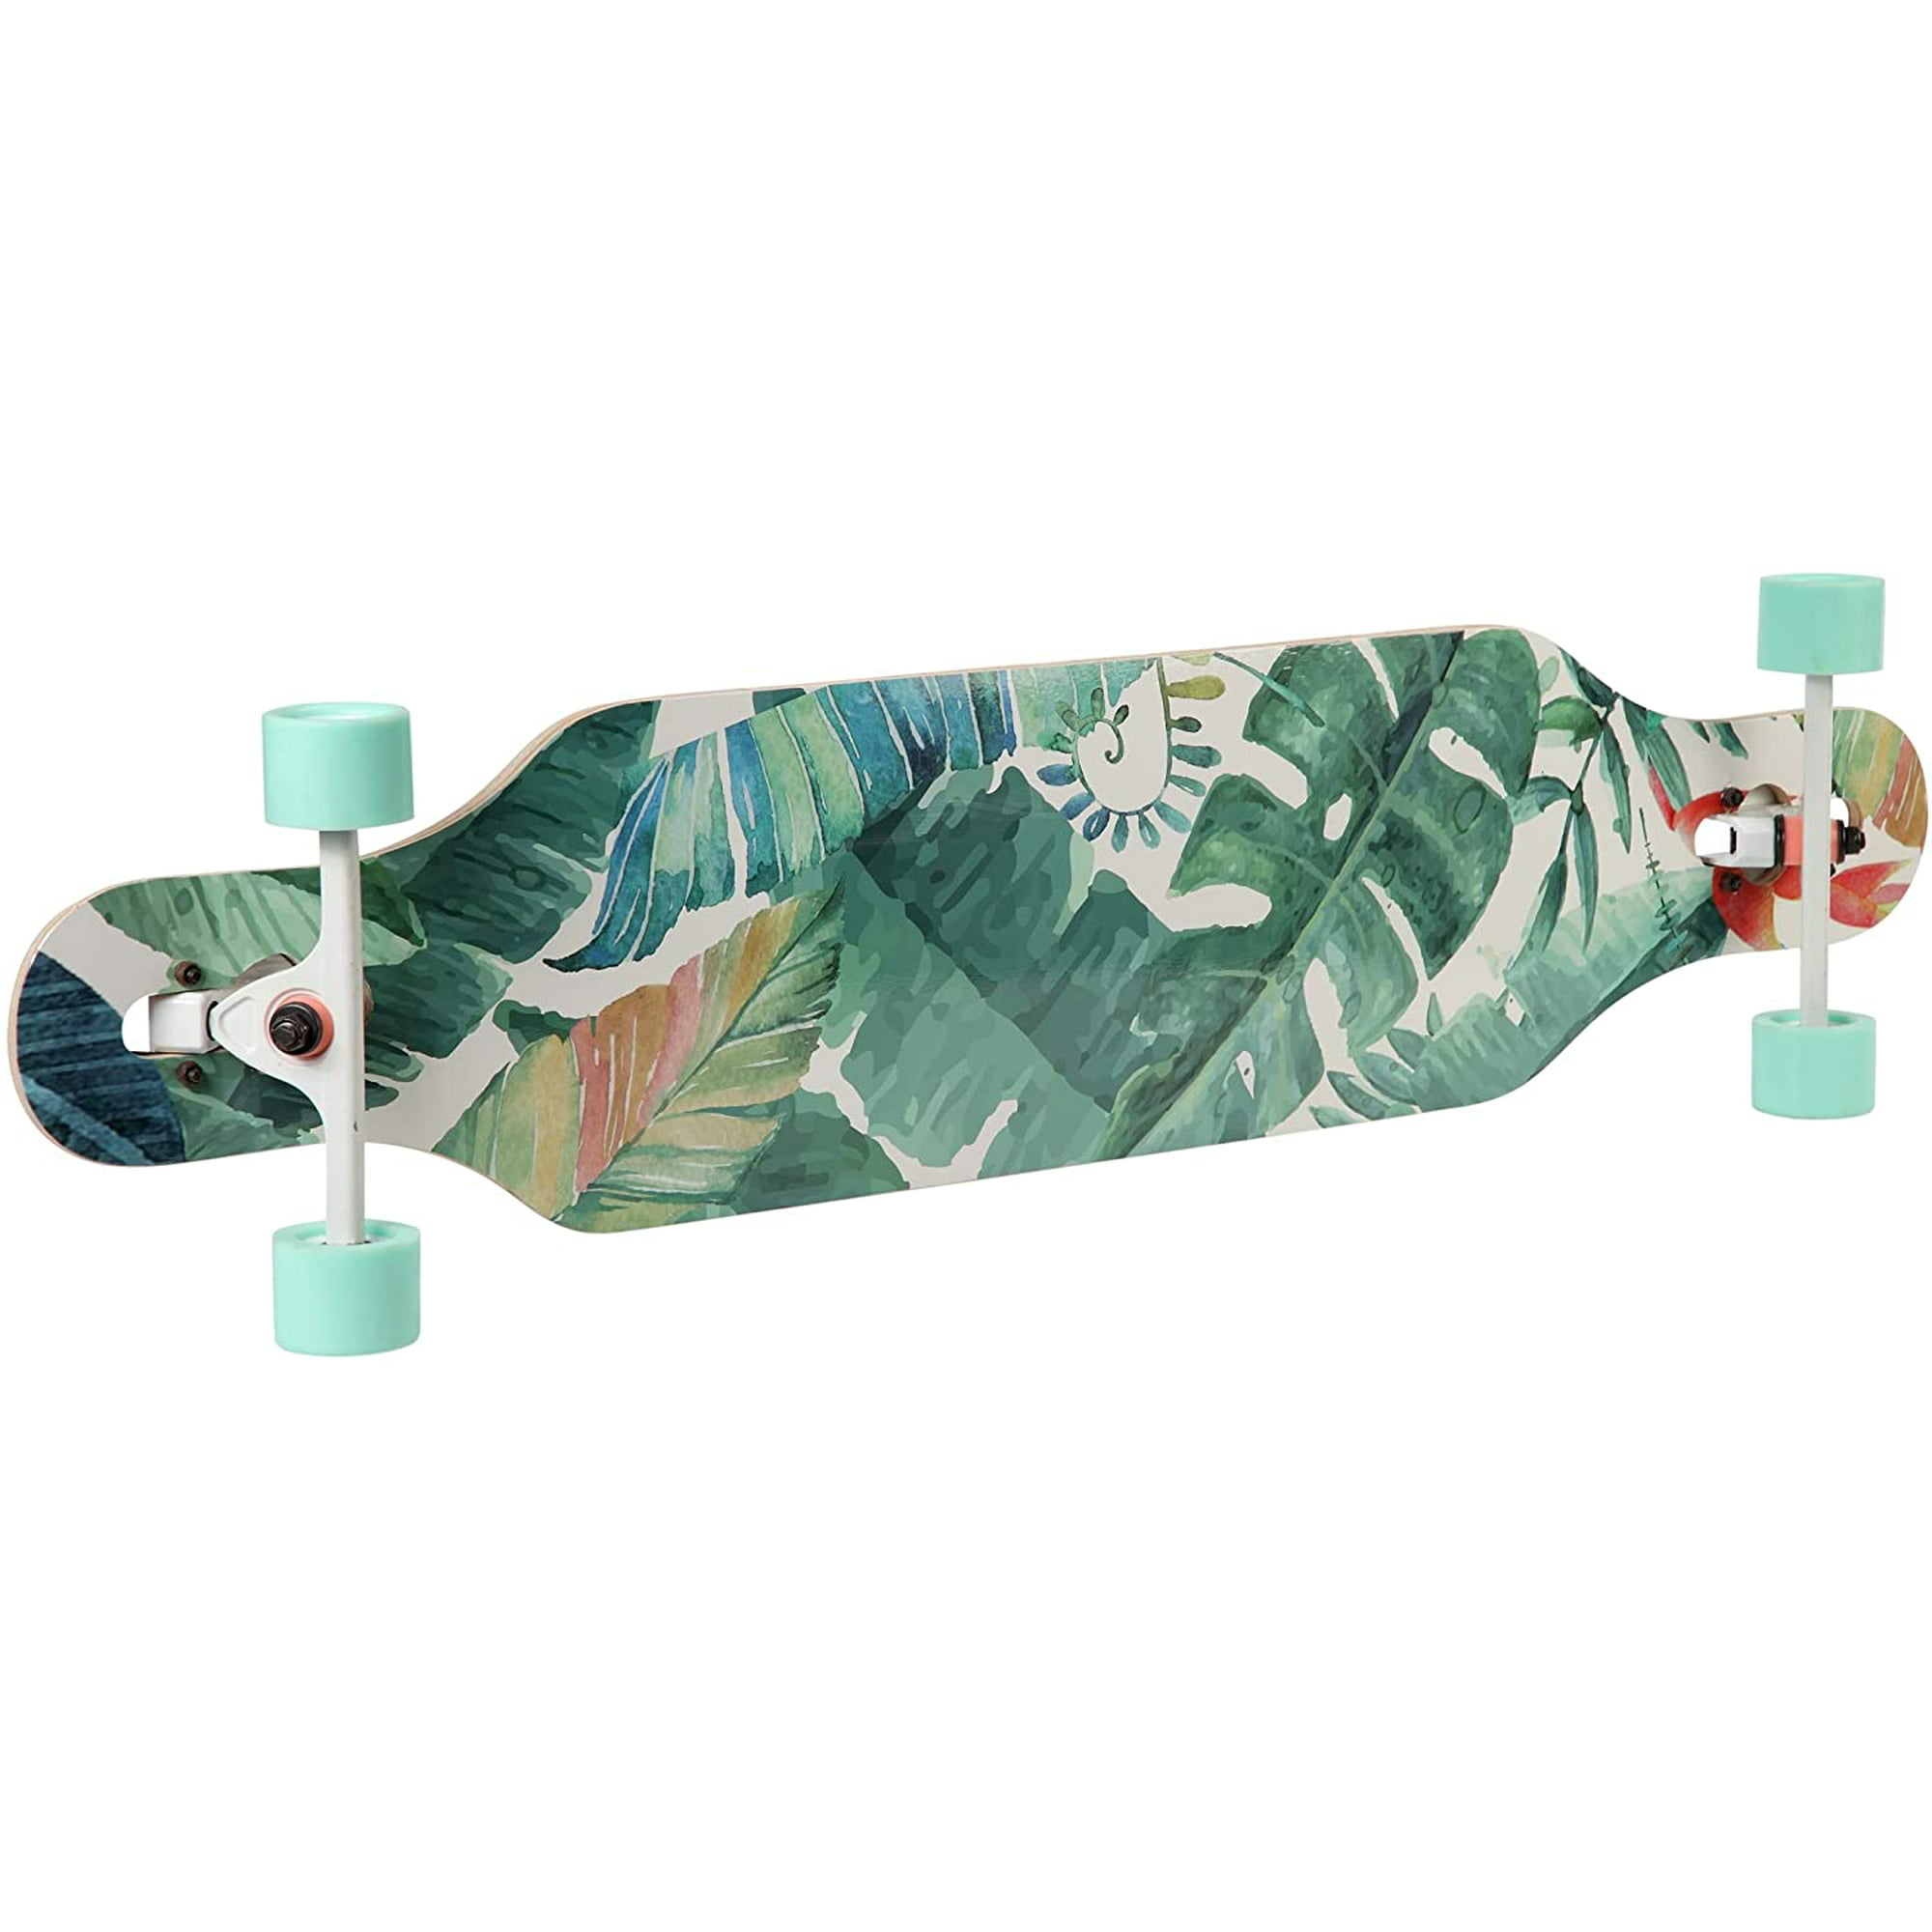 41 inch Freeride Longboard Drop Through Skateboard 8 Ply Canadian Maple  Complete Cruiser for Cruising, Carving, Free-Style and Downhill